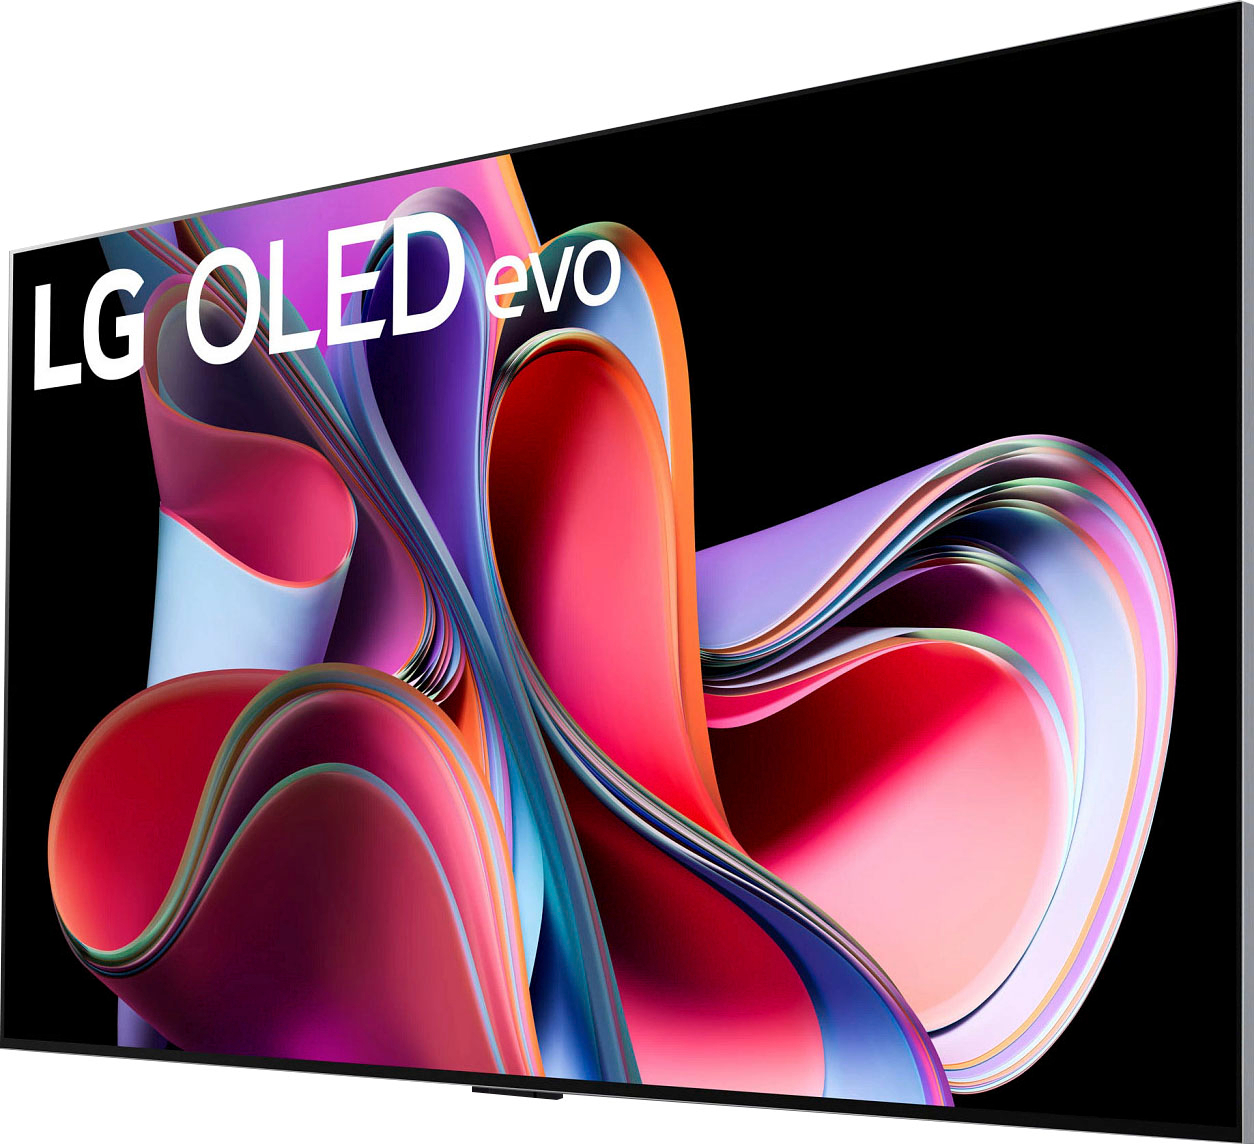 LG C3 & LG G3 65 inch Cyber Monday OLED TV deals: Prices plummet once more